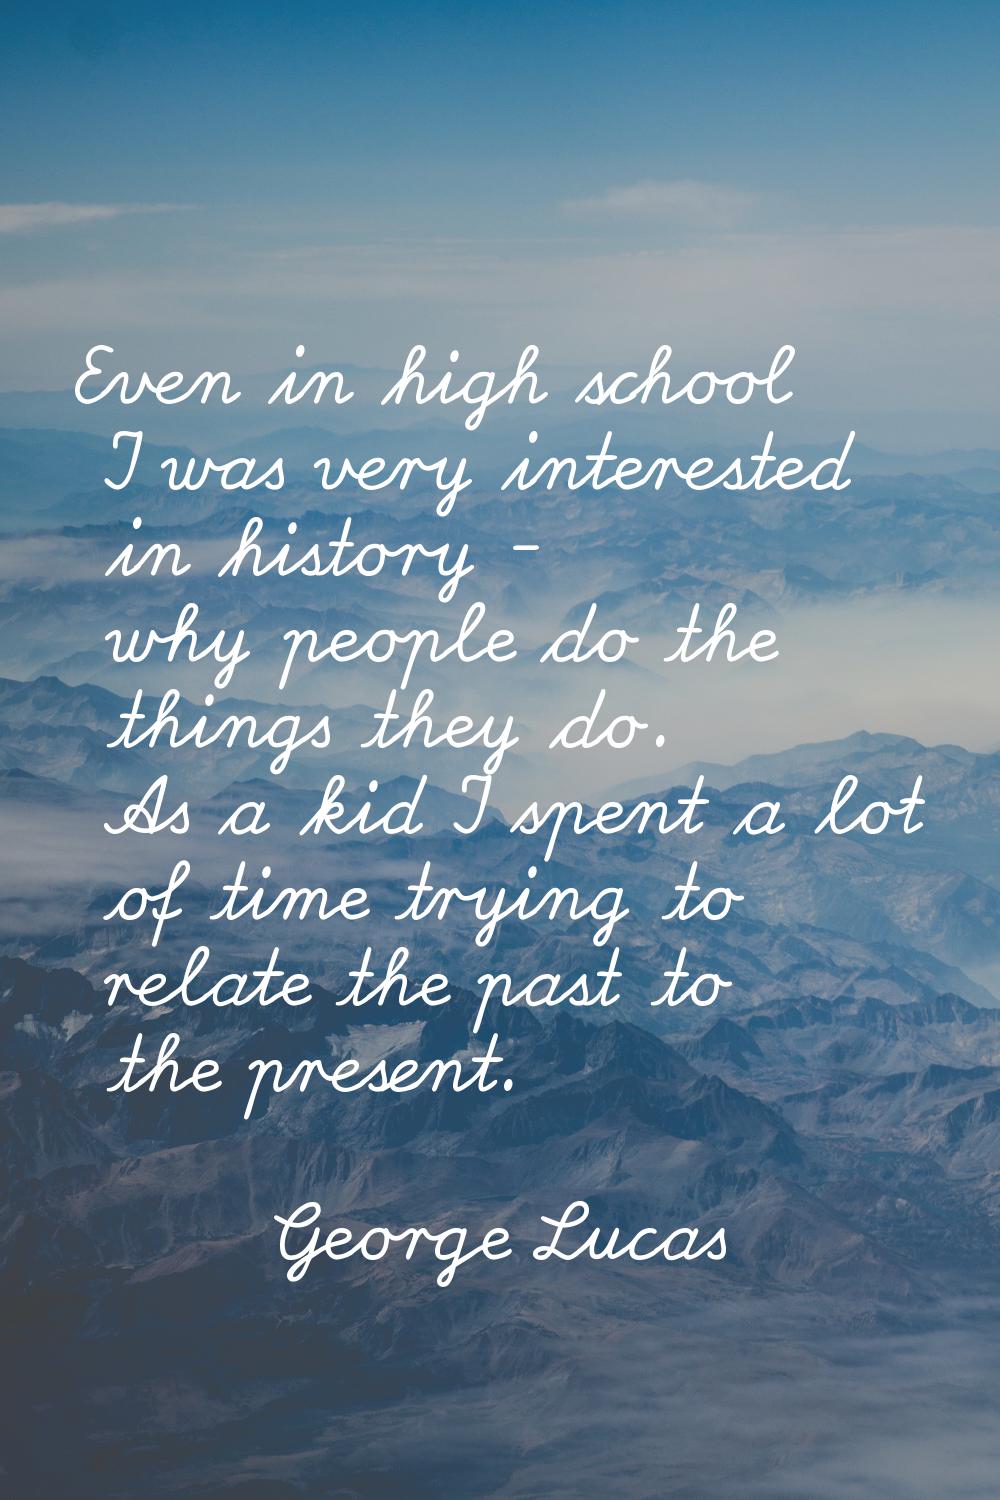 Even in high school I was very interested in history - why people do the things they do. As a kid I